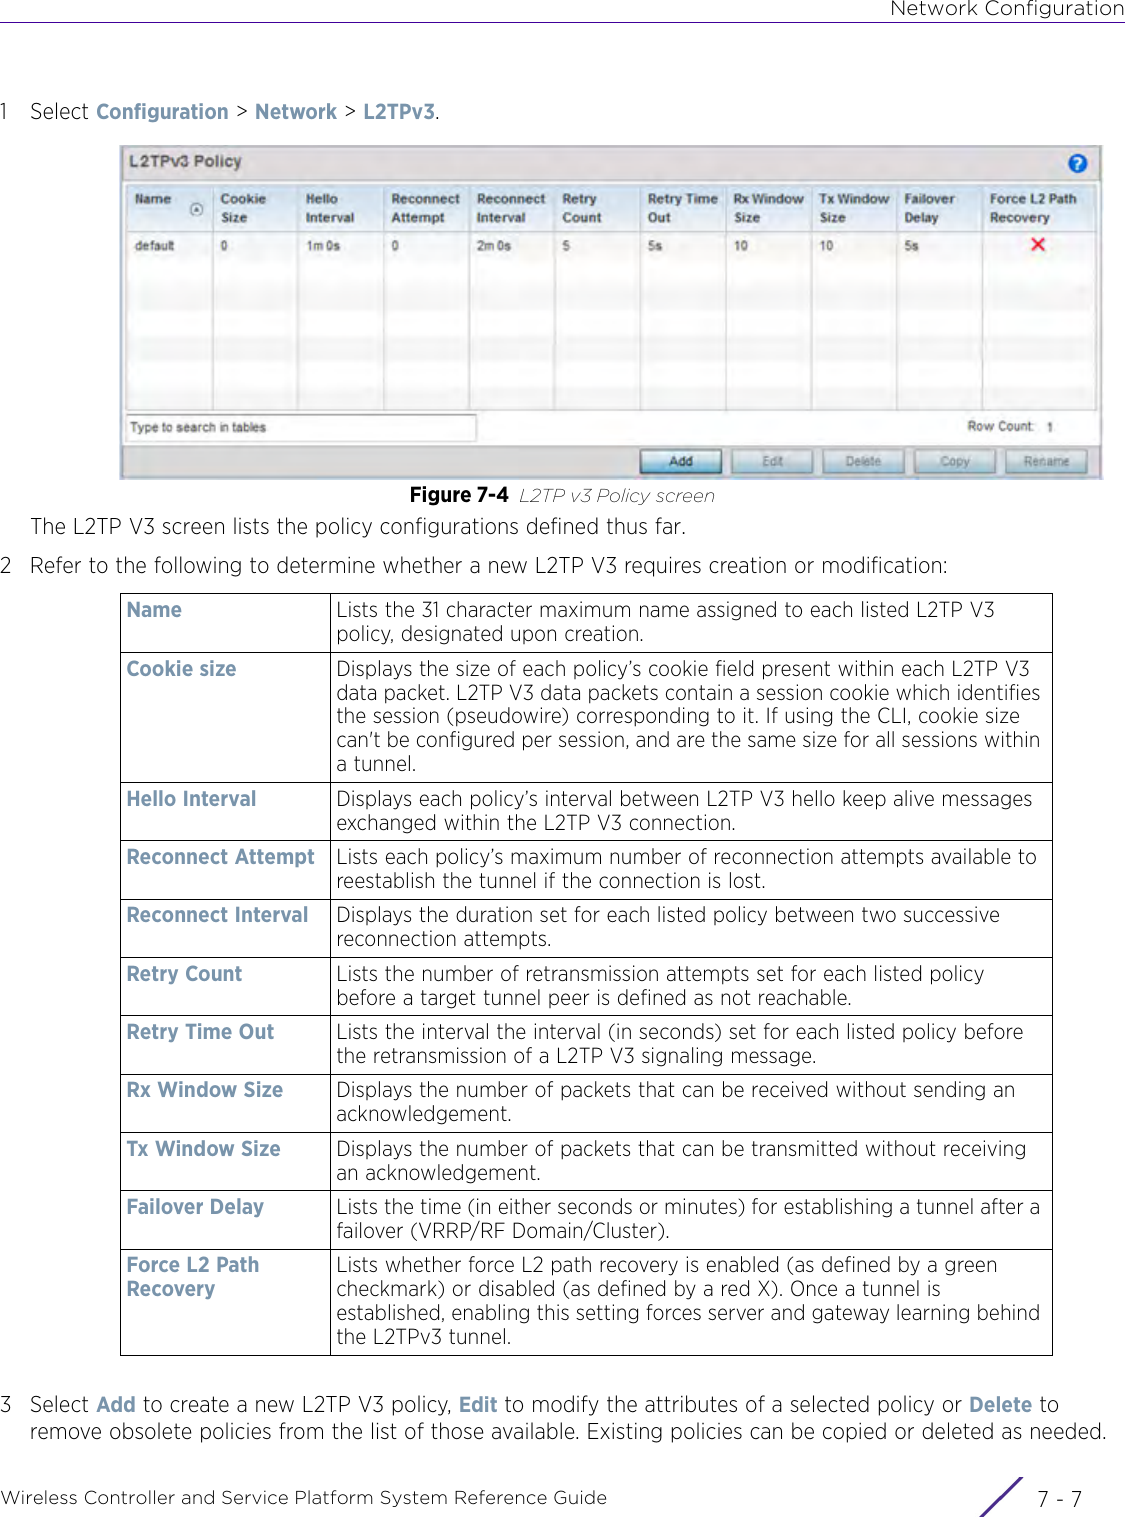 Network ConfigurationWireless Controller and Service Platform System Reference Guide 7 - 71Select Configuration &gt; Network &gt; L2TPv3.Figure 7-4 L2TP v3 Policy screen The L2TP V3 screen lists the policy configurations defined thus far.2 Refer to the following to determine whether a new L2TP V3 requires creation or modification:3Select Add to create a new L2TP V3 policy, Edit to modify the attributes of a selected policy or Delete to remove obsolete policies from the list of those available. Existing policies can be copied or deleted as needed.Name Lists the 31 character maximum name assigned to each listed L2TP V3 policy, designated upon creation.Cookie size Displays the size of each policy’s cookie field present within each L2TP V3 data packet. L2TP V3 data packets contain a session cookie which identifies the session (pseudowire) corresponding to it. If using the CLI, cookie size can&apos;t be configured per session, and are the same size for all sessions within a tunnel.Hello Interval Displays each policy’s interval between L2TP V3 hello keep alive messages exchanged within the L2TP V3 connection.Reconnect Attempt Lists each policy’s maximum number of reconnection attempts available to reestablish the tunnel if the connection is lost. Reconnect Interval Displays the duration set for each listed policy between two successive reconnection attempts. Retry Count Lists the number of retransmission attempts set for each listed policy before a target tunnel peer is defined as not reachable. Retry Time Out Lists the interval the interval (in seconds) set for each listed policy before the retransmission of a L2TP V3 signaling message. Rx Window Size Displays the number of packets that can be received without sending an acknowledgement. Tx Window Size Displays the number of packets that can be transmitted without receiving an acknowledgement. Failover Delay Lists the time (in either seconds or minutes) for establishing a tunnel after a failover (VRRP/RF Domain/Cluster).Force L2 Path RecoveryLists whether force L2 path recovery is enabled (as defined by a green checkmark) or disabled (as defined by a red X). Once a tunnel is established, enabling this setting forces server and gateway learning behind the L2TPv3 tunnel.